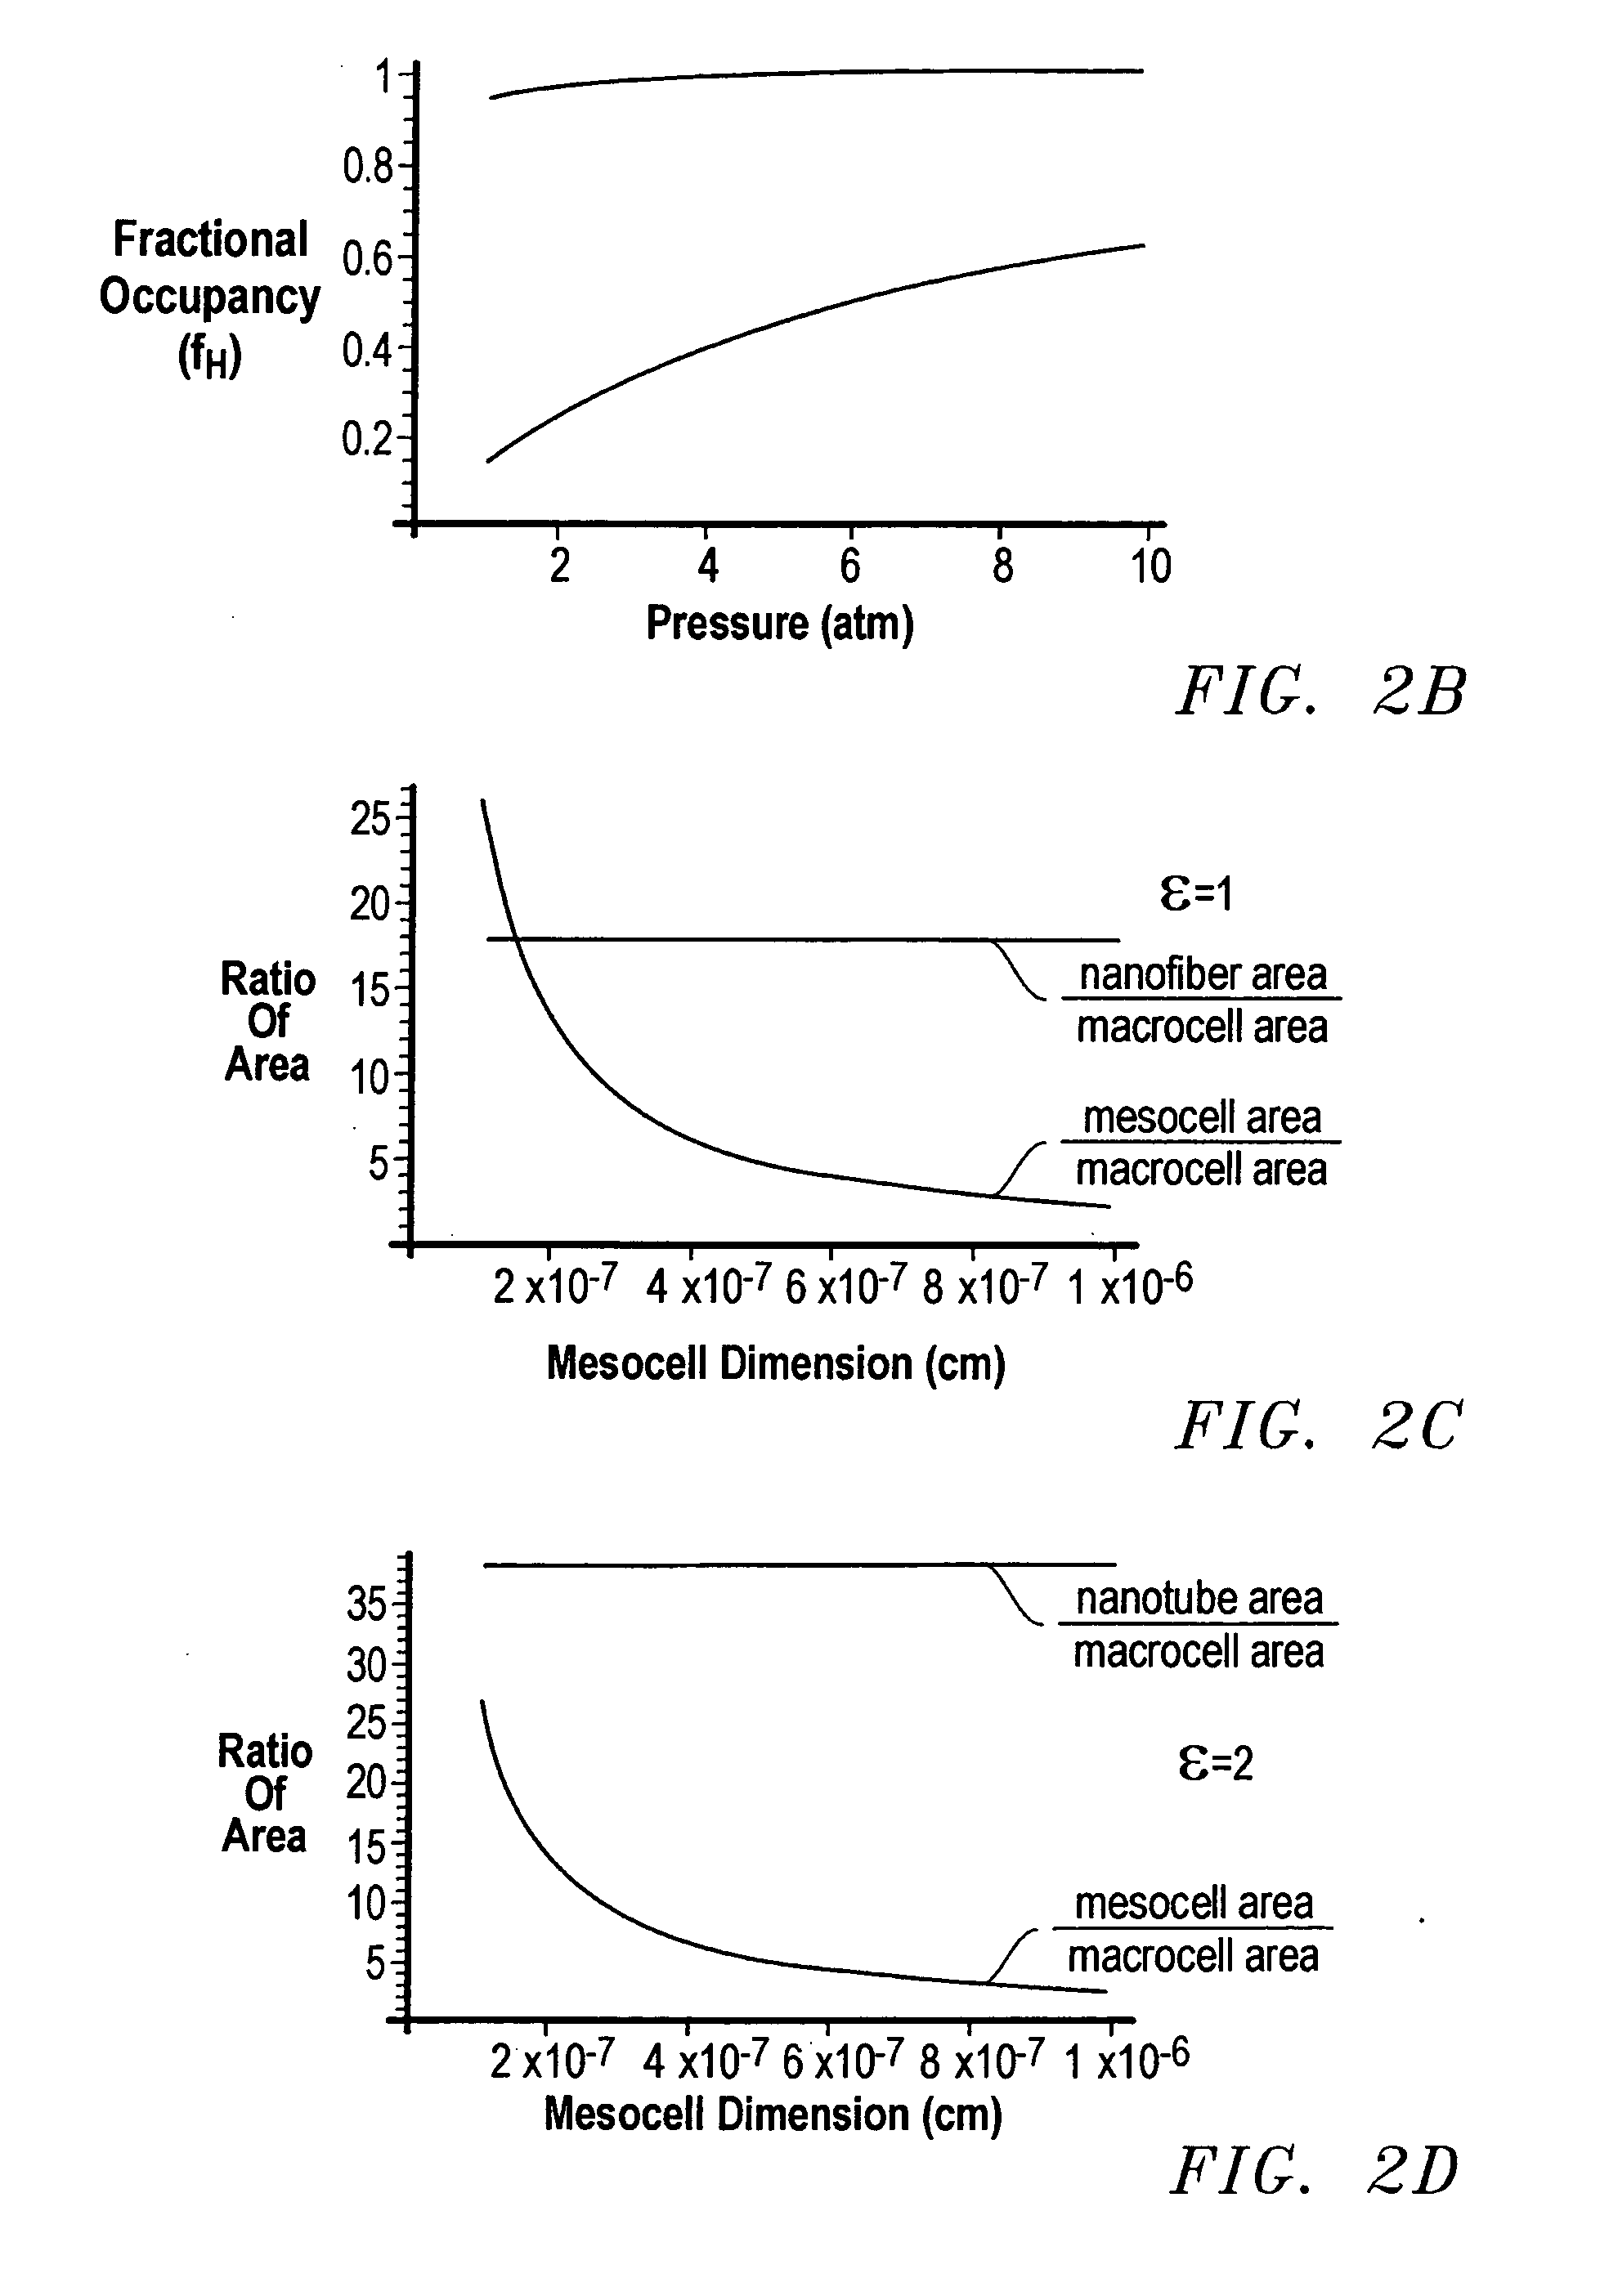 Storage device and method for sorption and desorption of molecular gas contained by storage sites of nano-filament laded reticulated aerogel